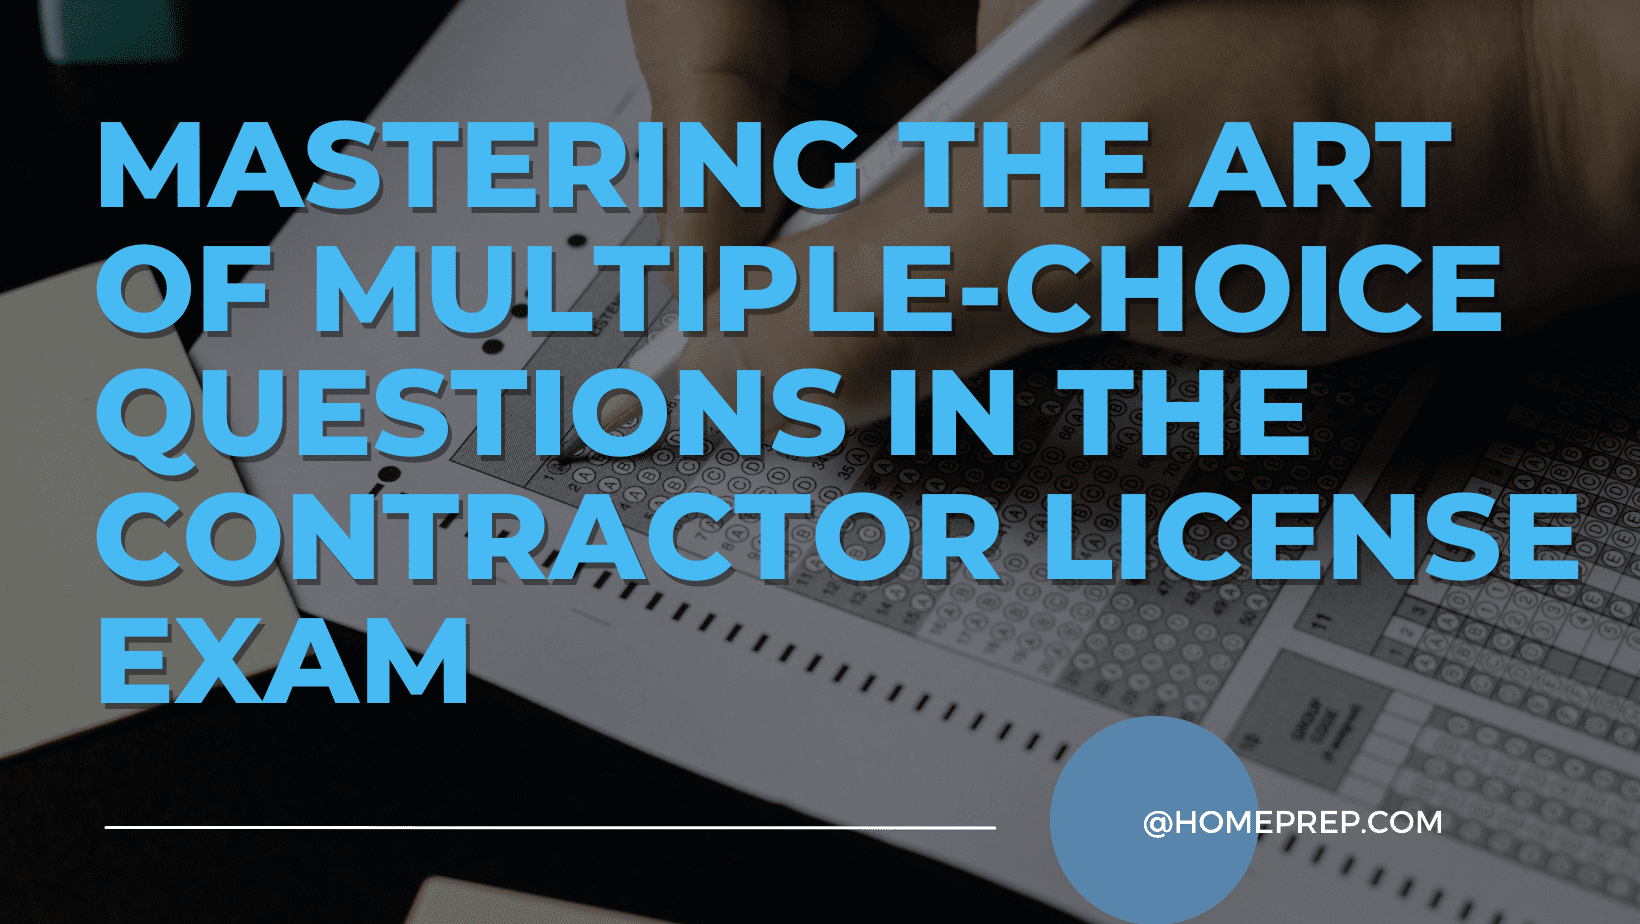 Mastering the Art of Multiple-Choice Questions in the Contractor License Exam